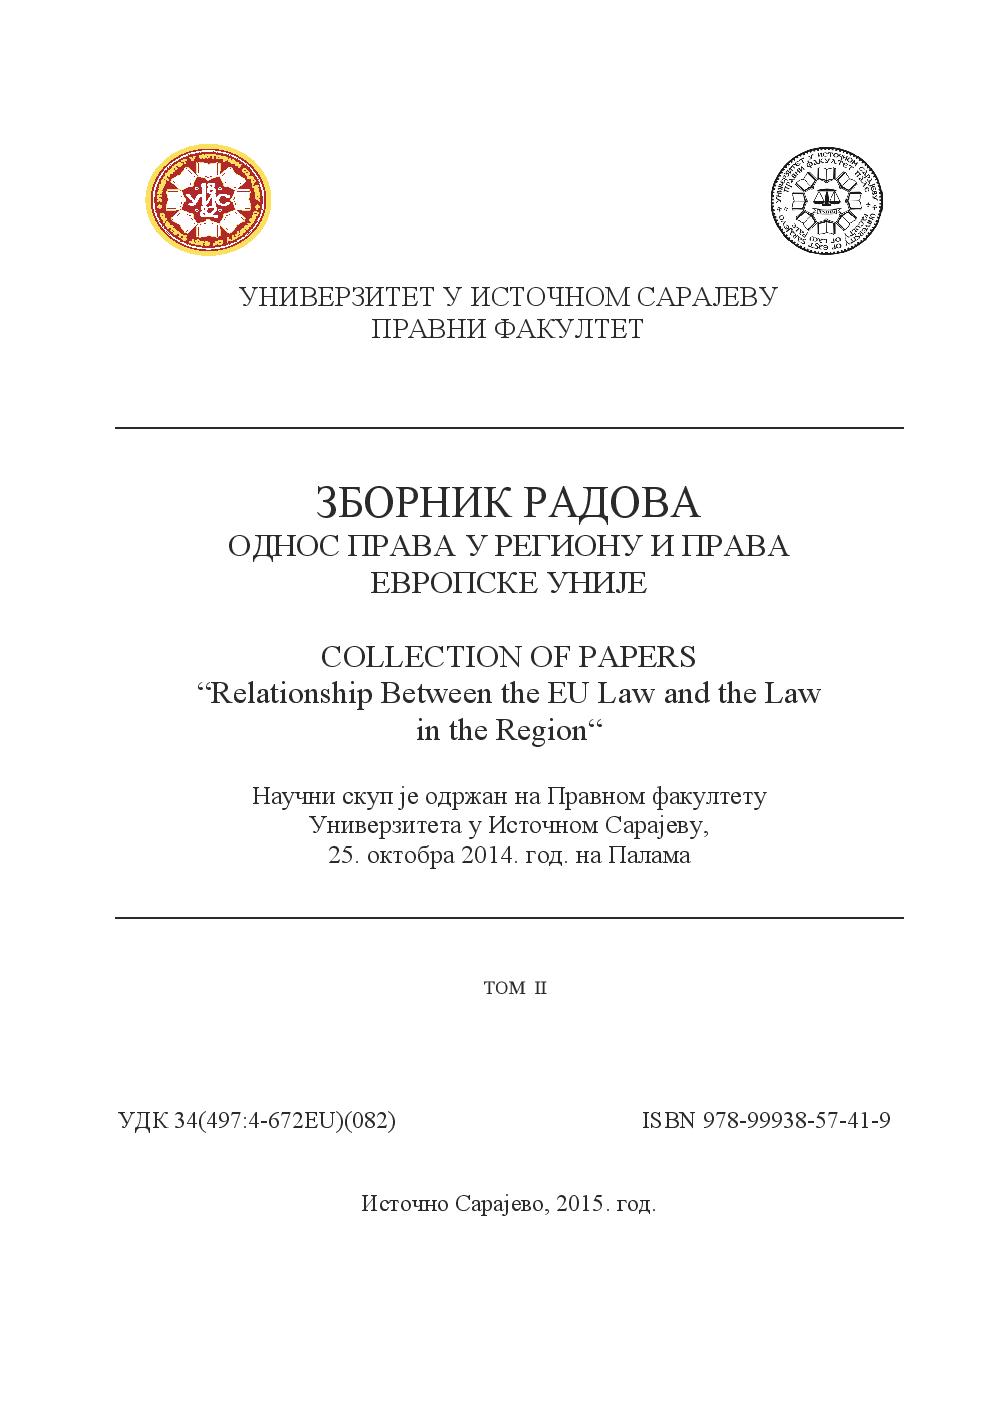 The Efficiency Principle and the Right to Trial Within a Reasonable Time in the Civil Procedure Law of the Republic of Serbia Cover Image